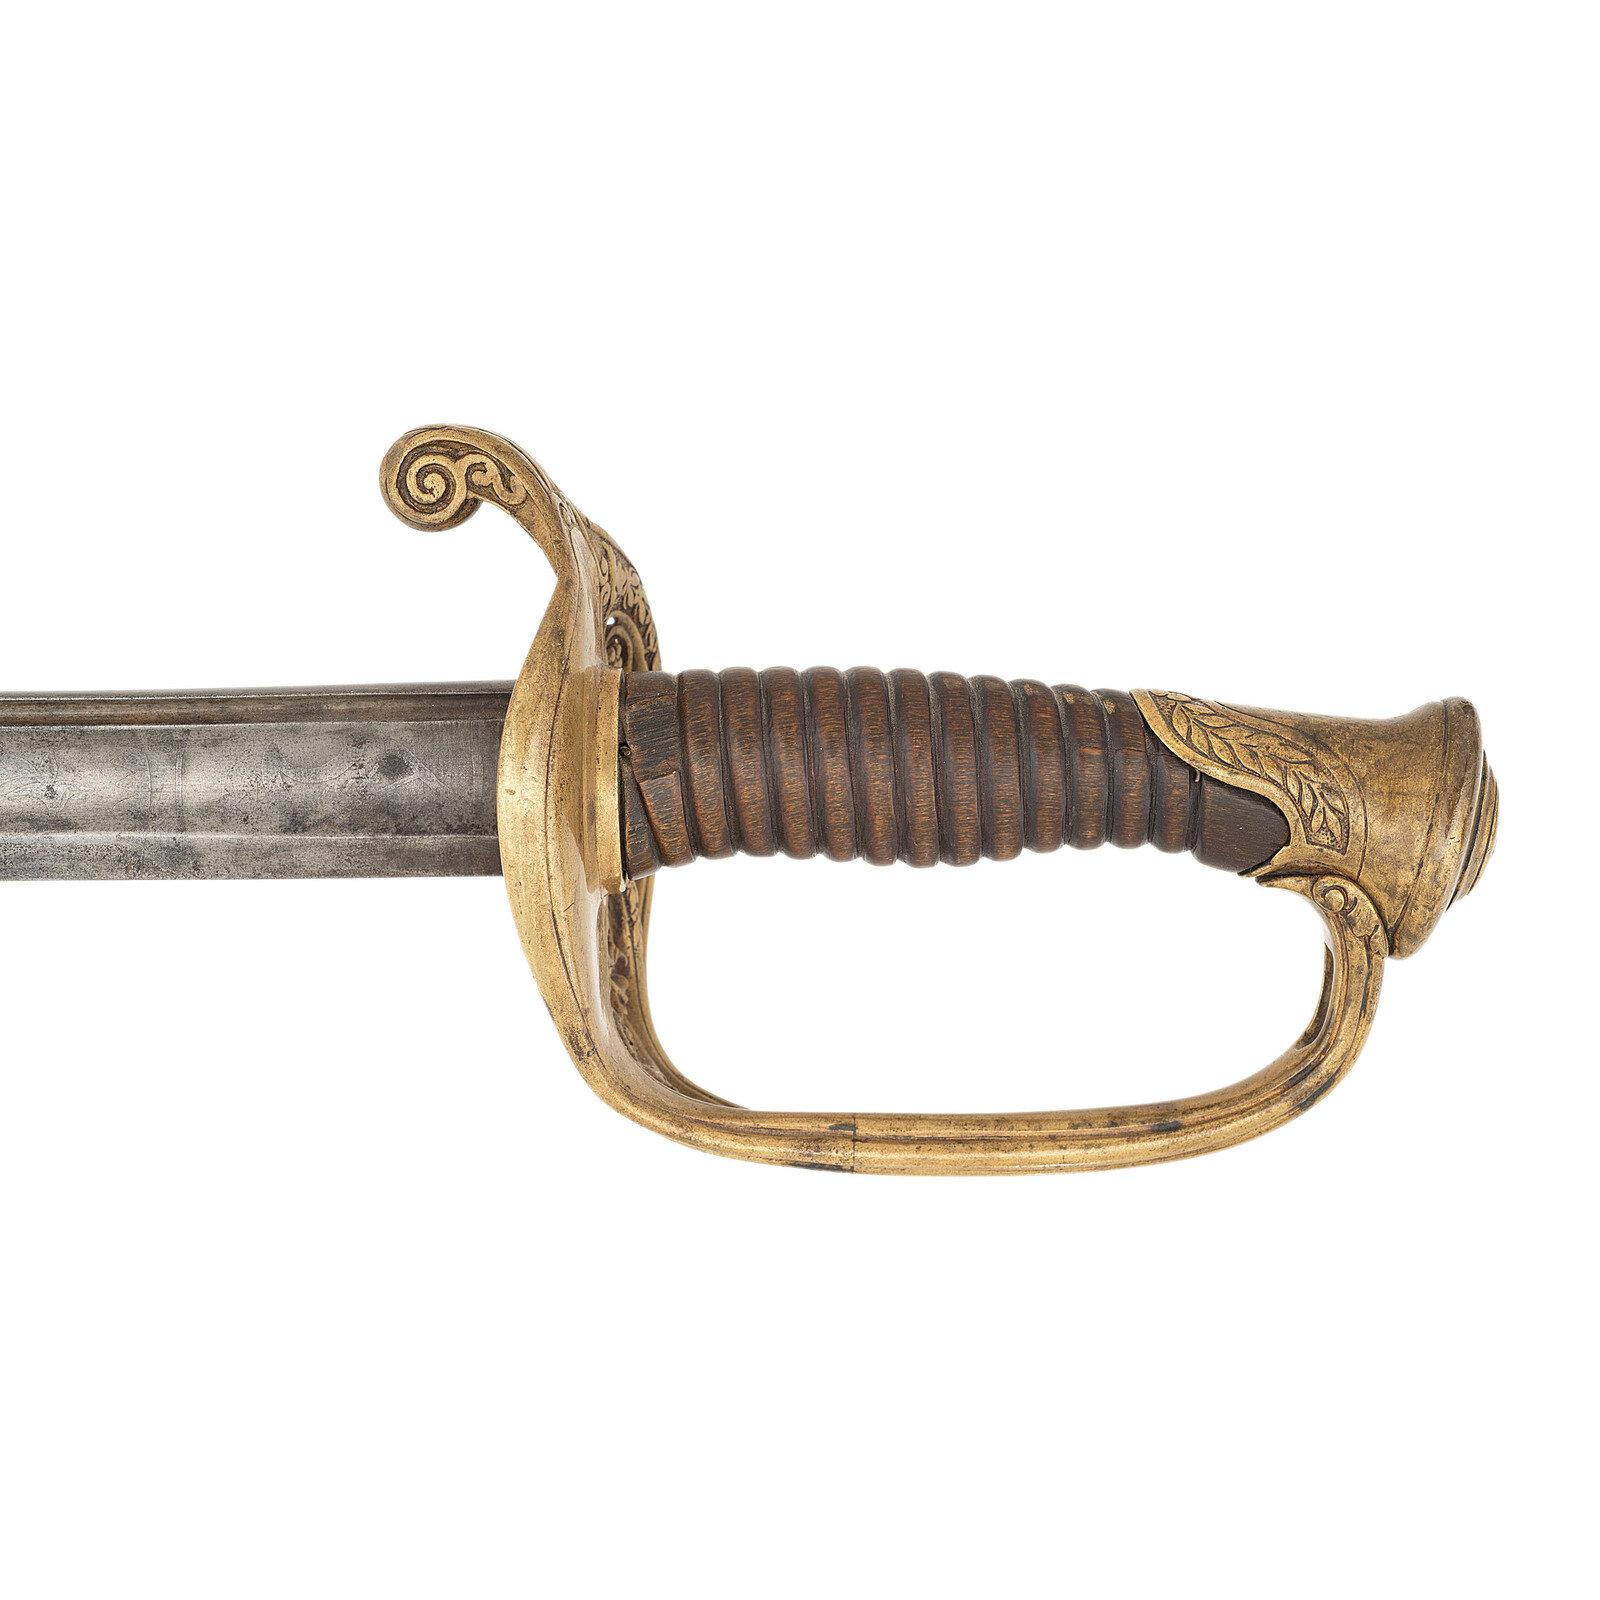 French Import Foot Officers Sword of Lt. Col. John C. Black - Congressional Medal of Honor Recipient